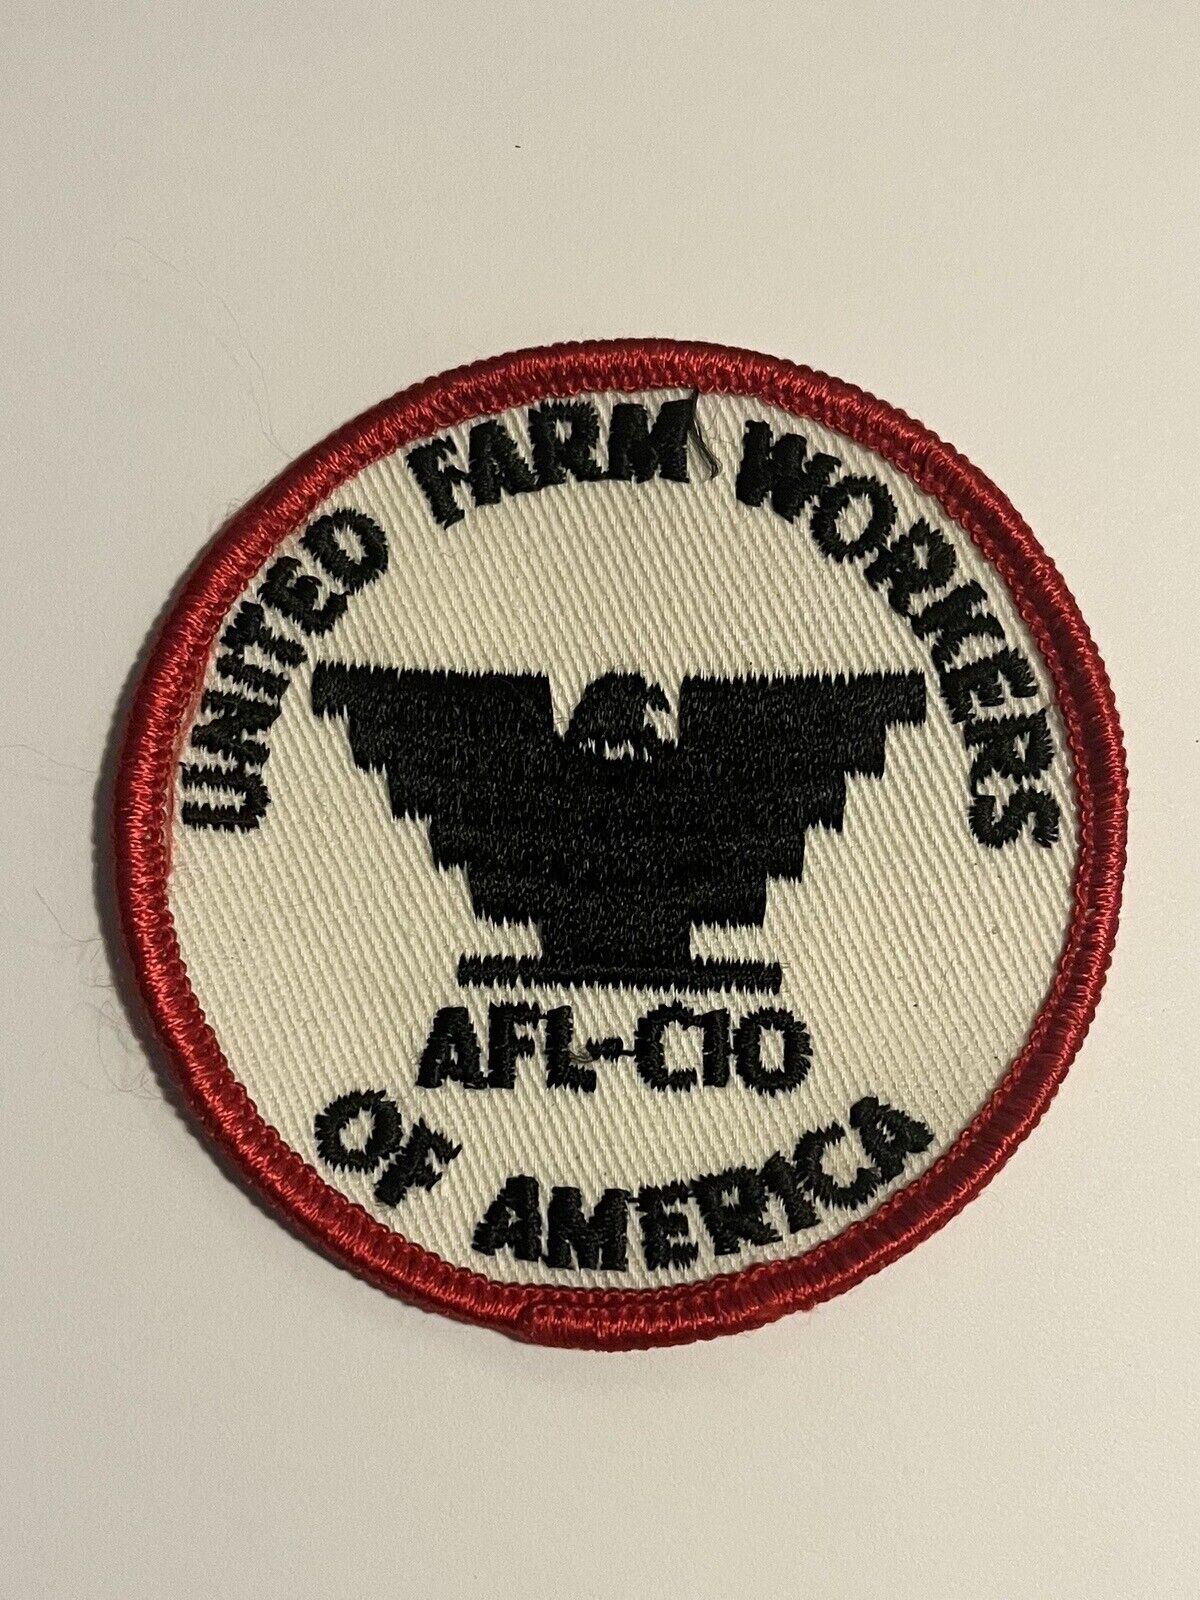 NEW VTG AUTHENTIC UNITED FARM WORKERS UFW AFL-CIO UNION EMBROIDERED 3”PATCH RARE